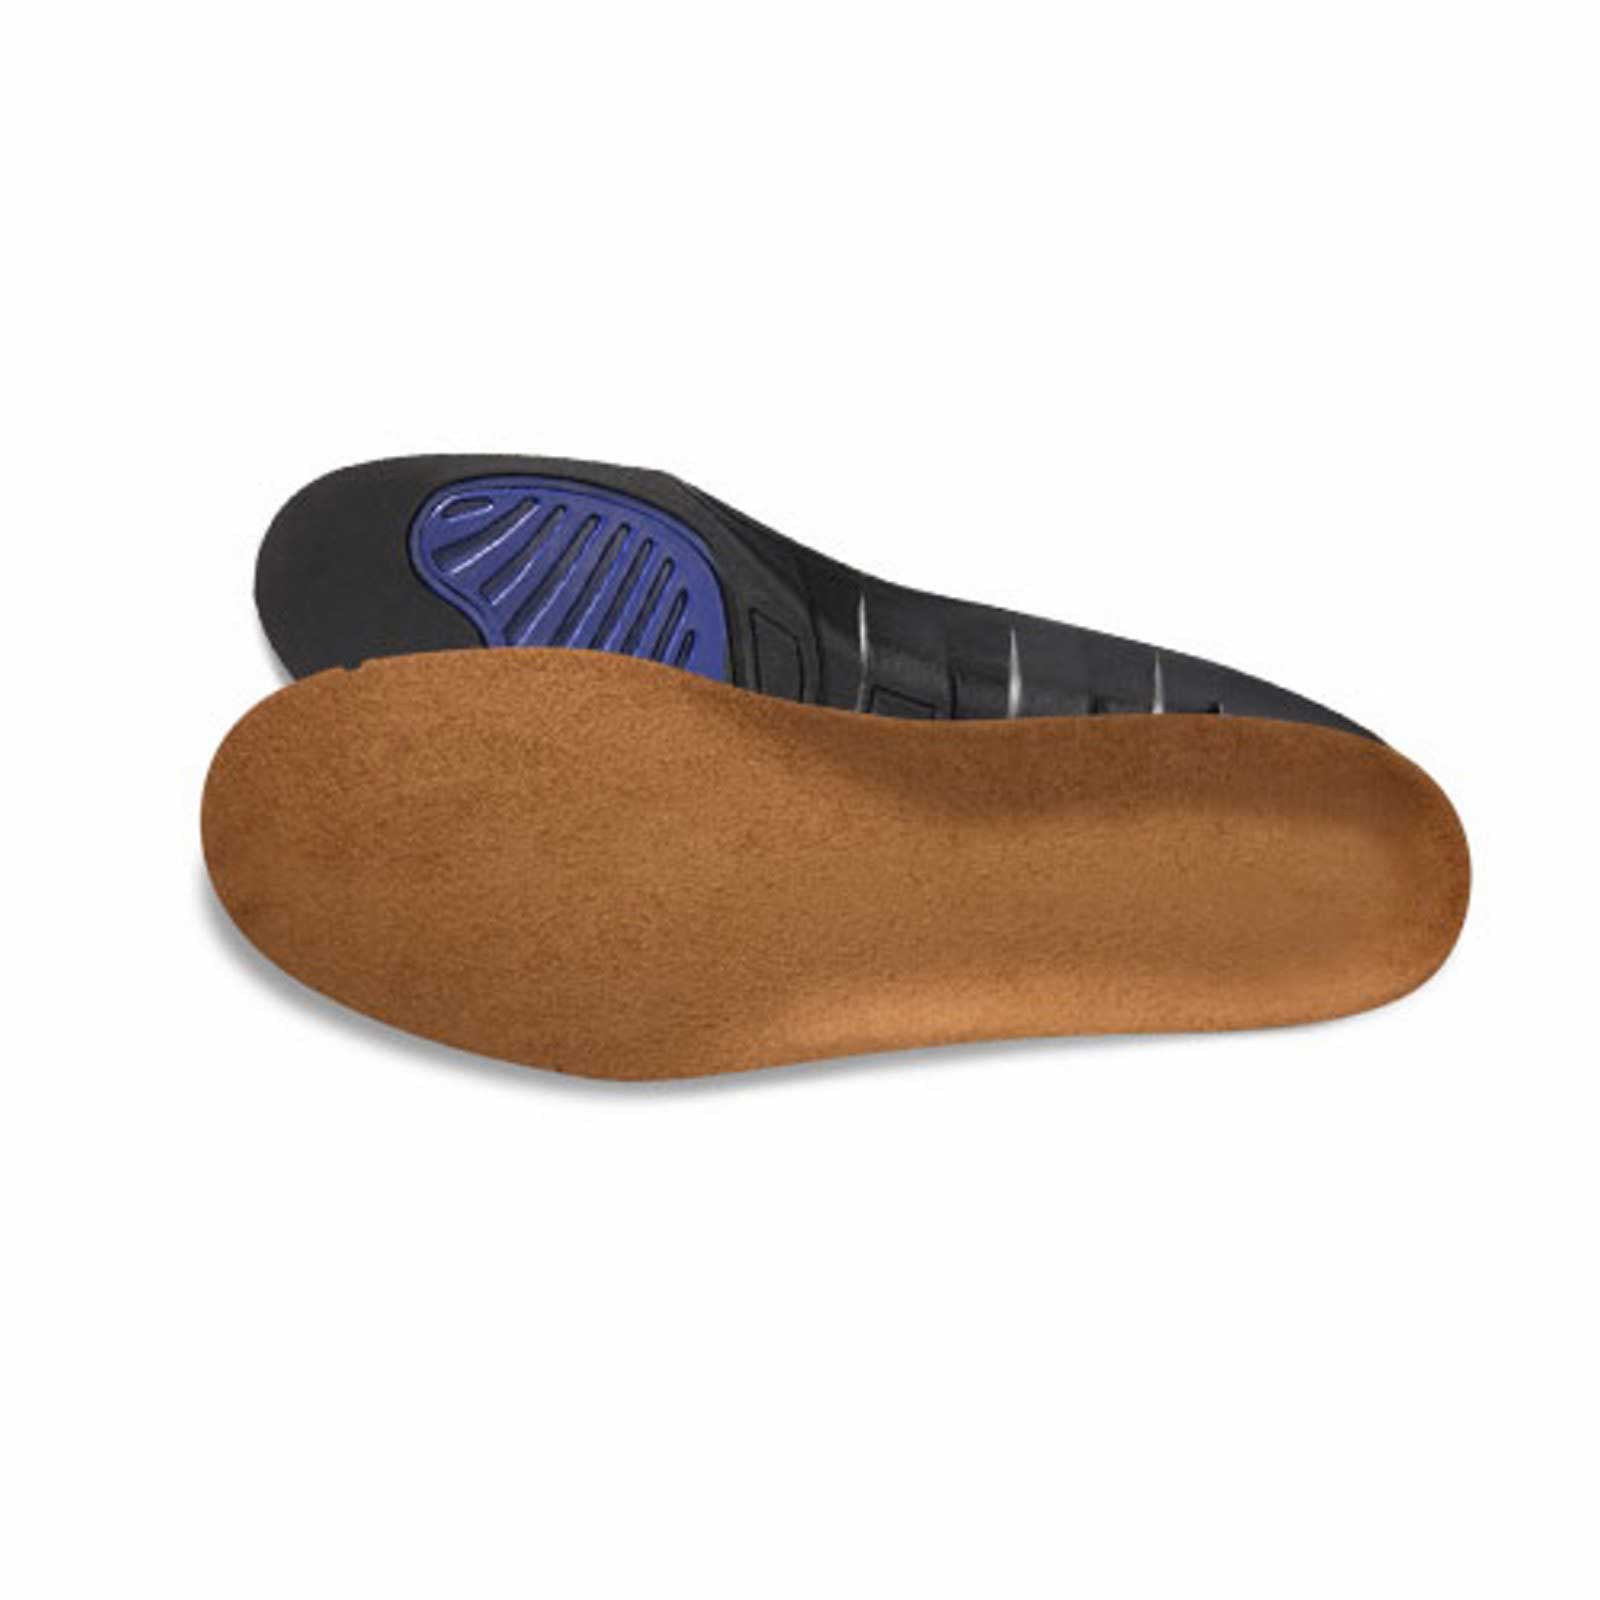 Dr. Comfort - Women's Gel Plus Shoe Inserts For Medial And Lateral Stability - Medium - (1 Pair)